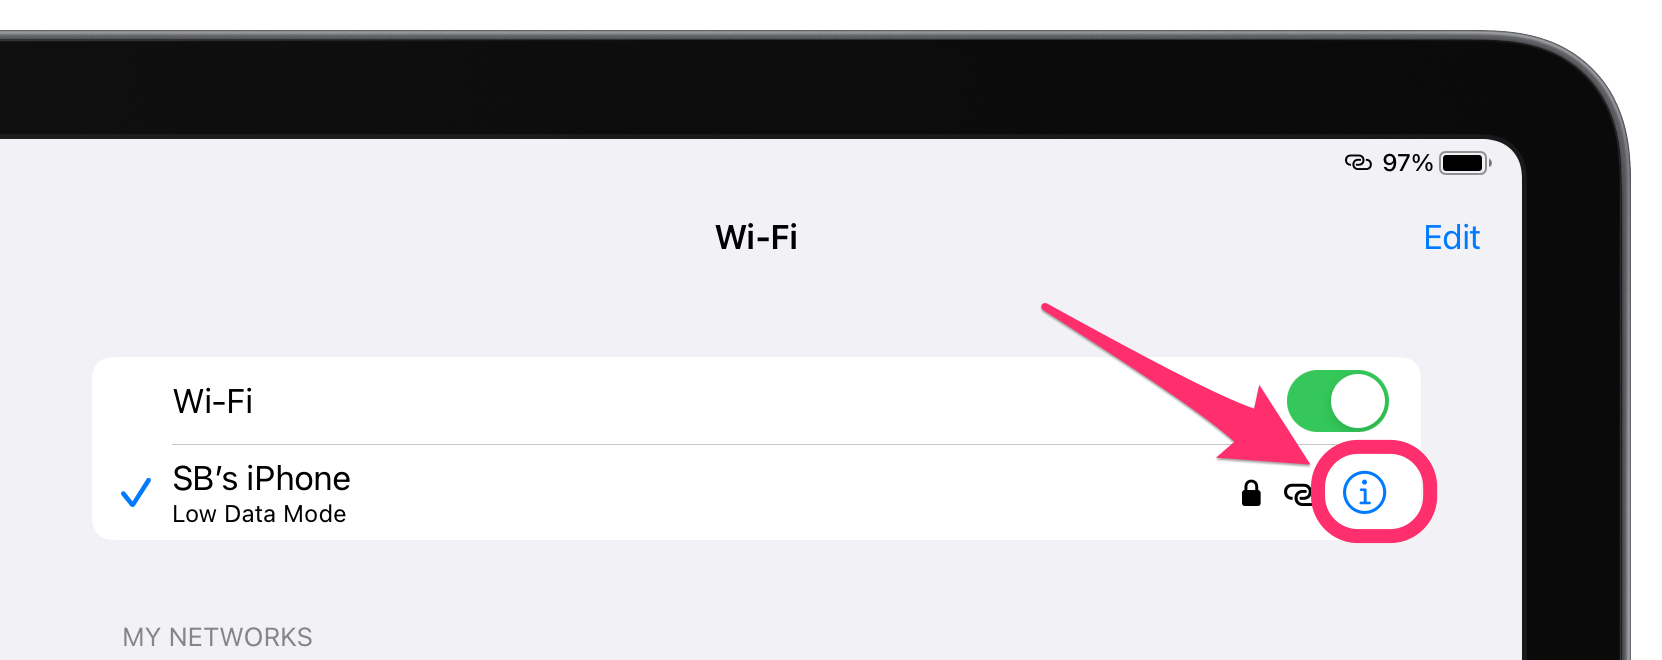 info button for wifi network